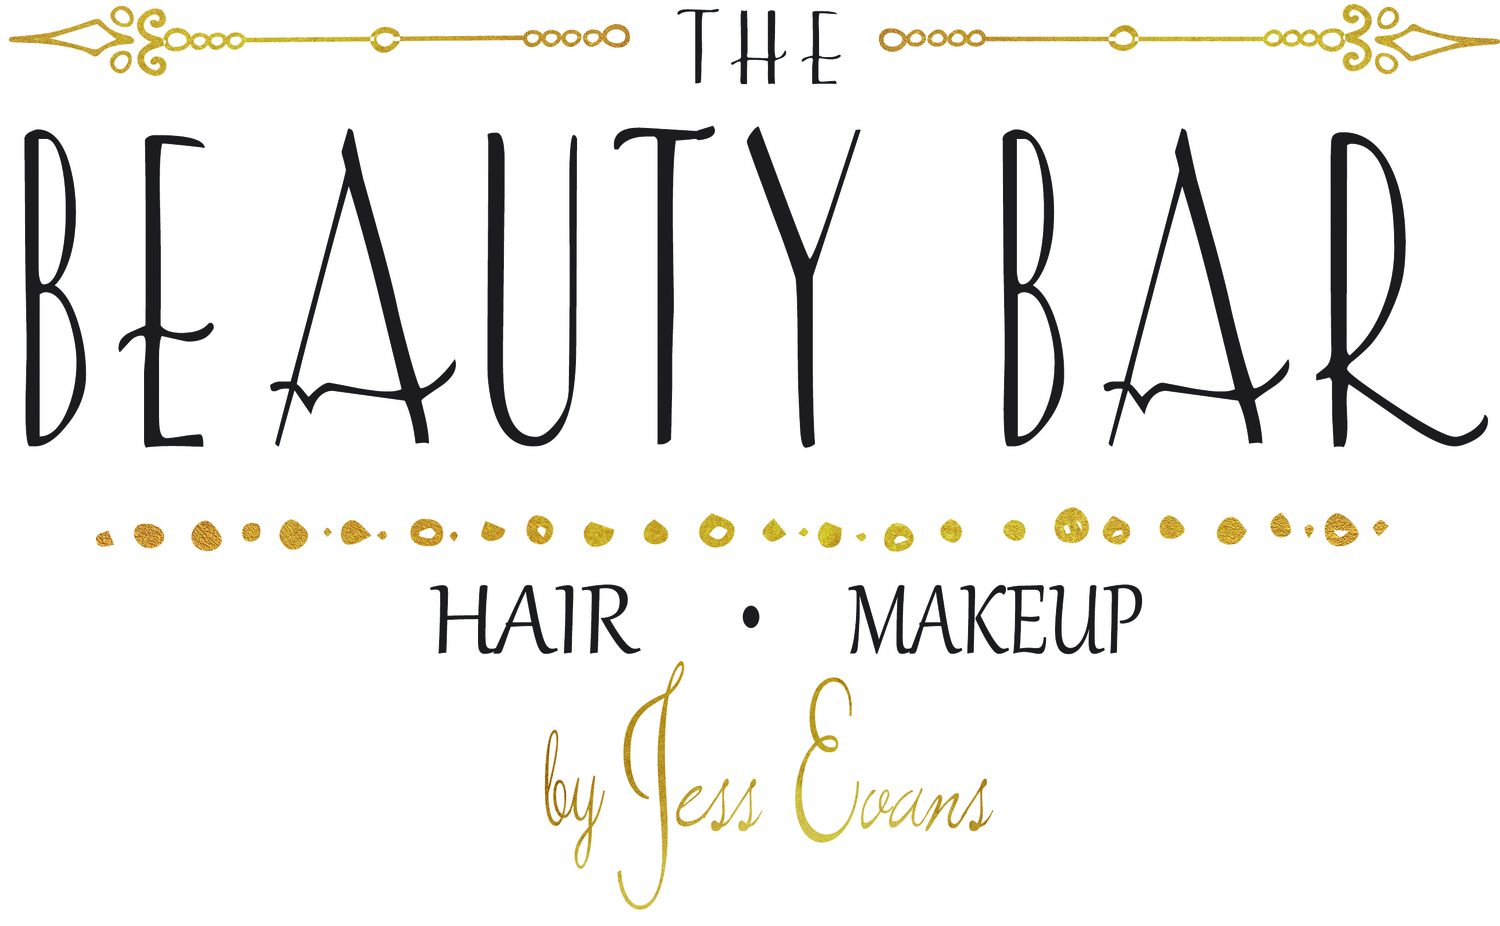 CONTACT — The beauty bar by Jess Evans